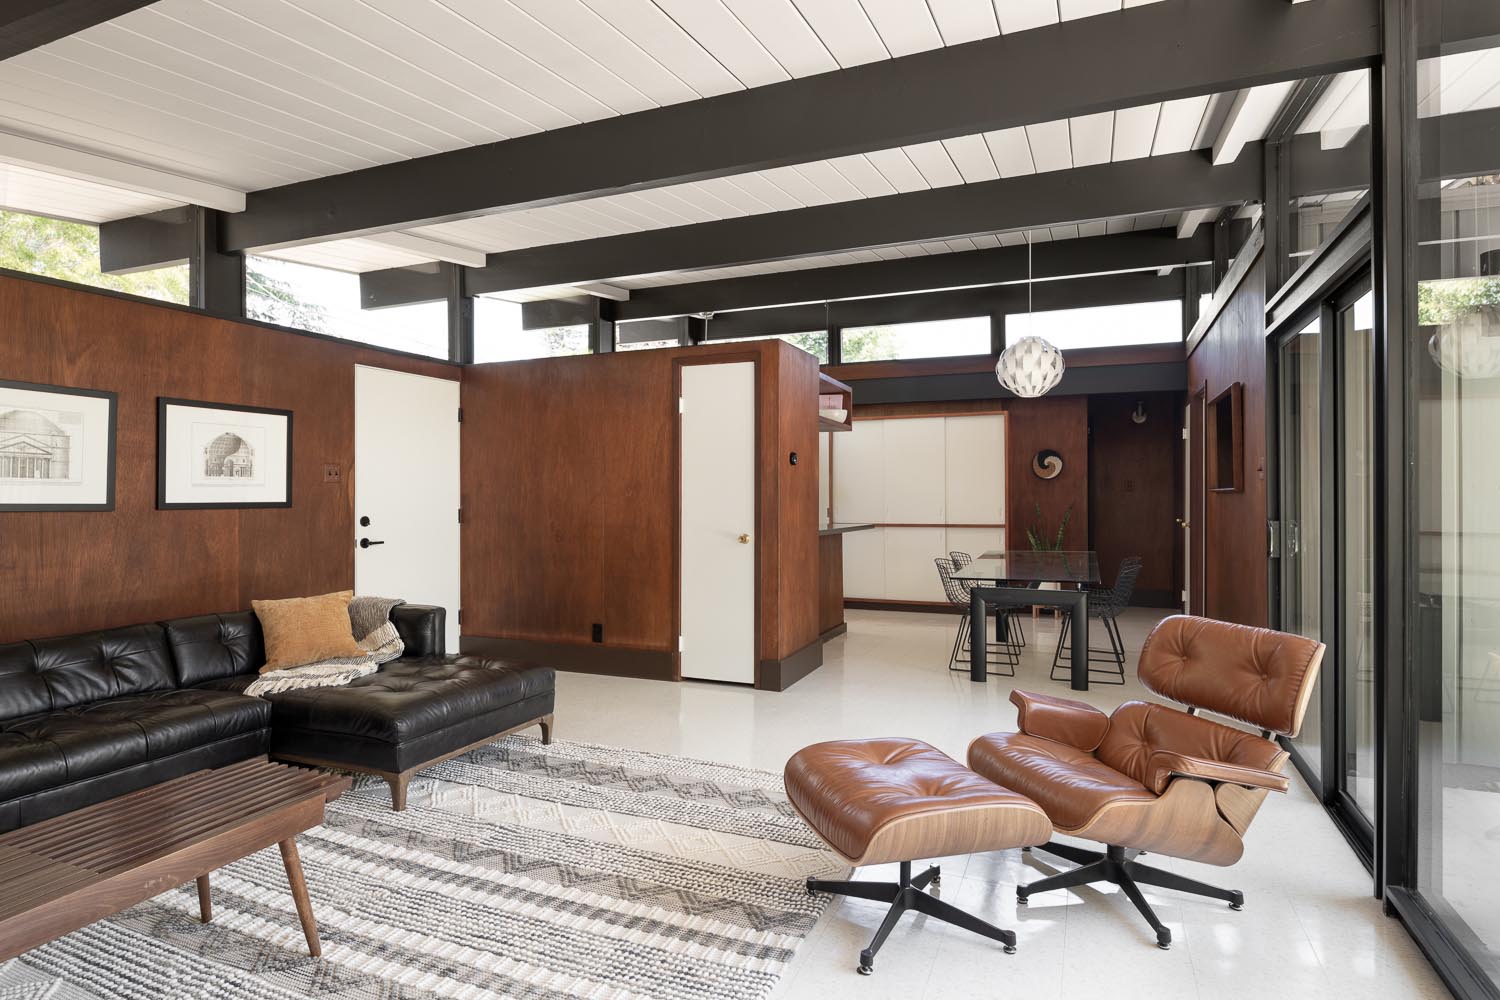 The restoration of an Eichler home included keeping the wood panel walls.